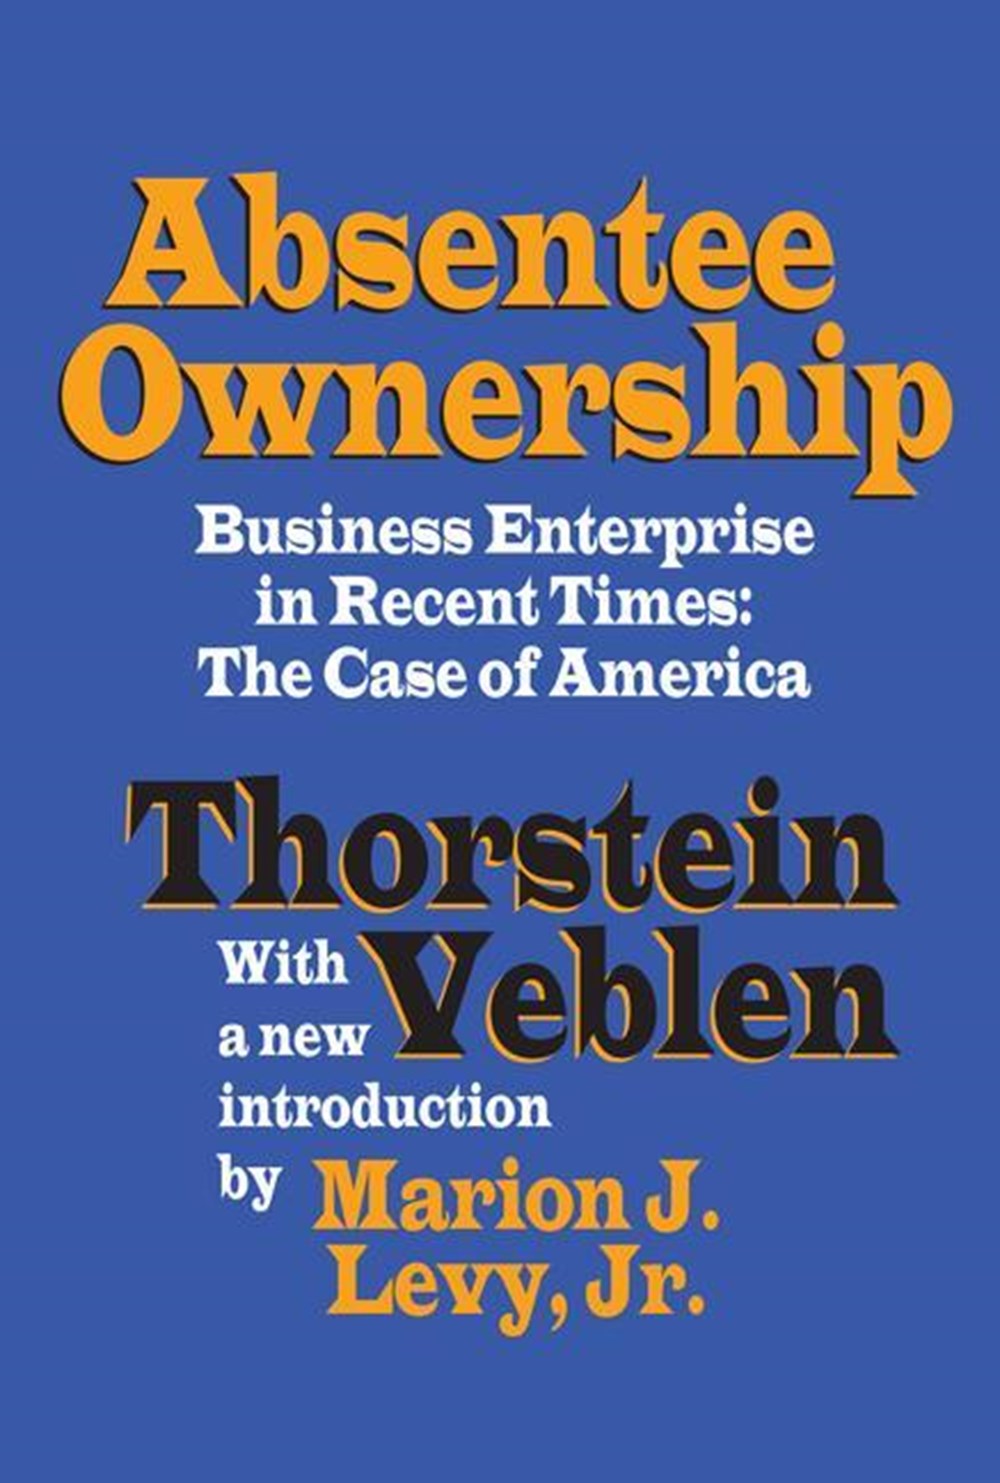 Absentee Ownership Business Enterprise in Recent Times - The Case of America